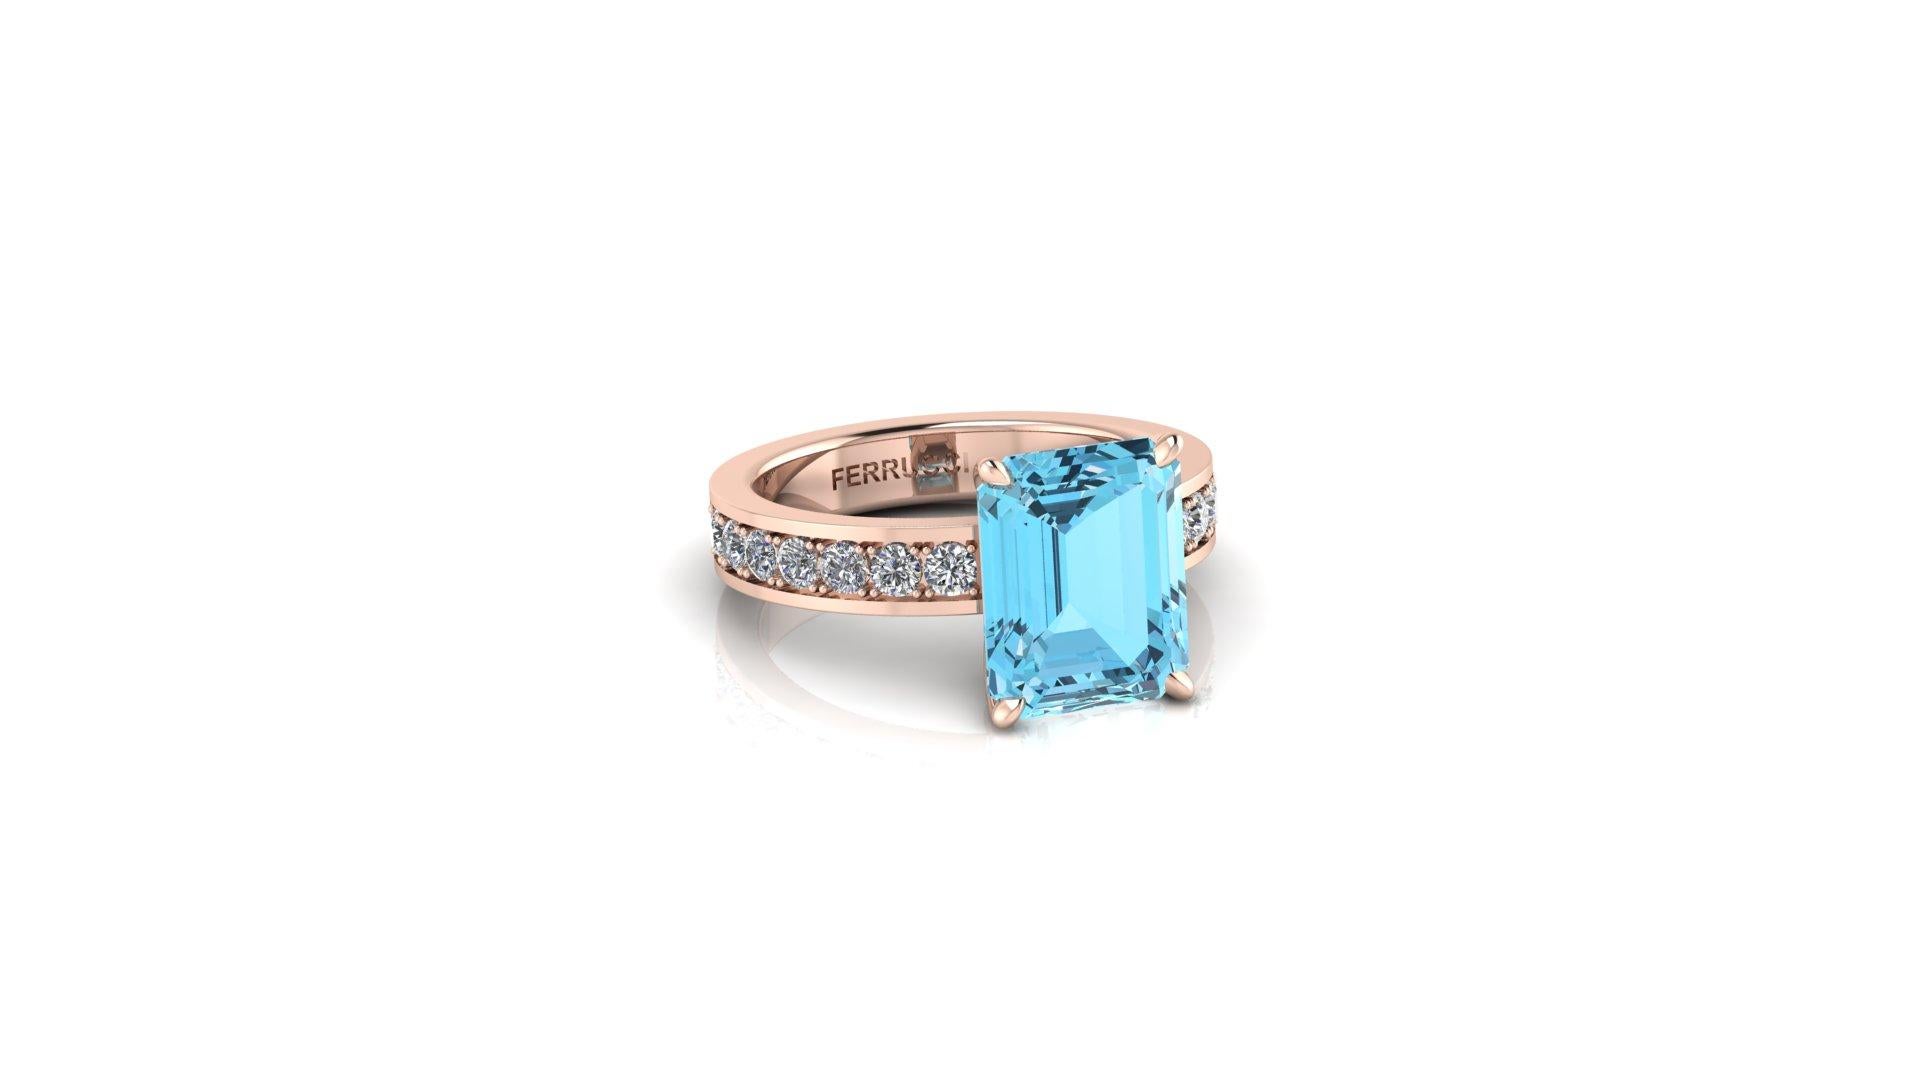 Natural Aquamarine 3.09 carats of intense blue, eye clean mineral, set in a 18k Rose gold custom made riing, showcasing a pave' half way down, of natural white Diamonds G/H color, VS clarity, for an approximate total carat weight of 0.35